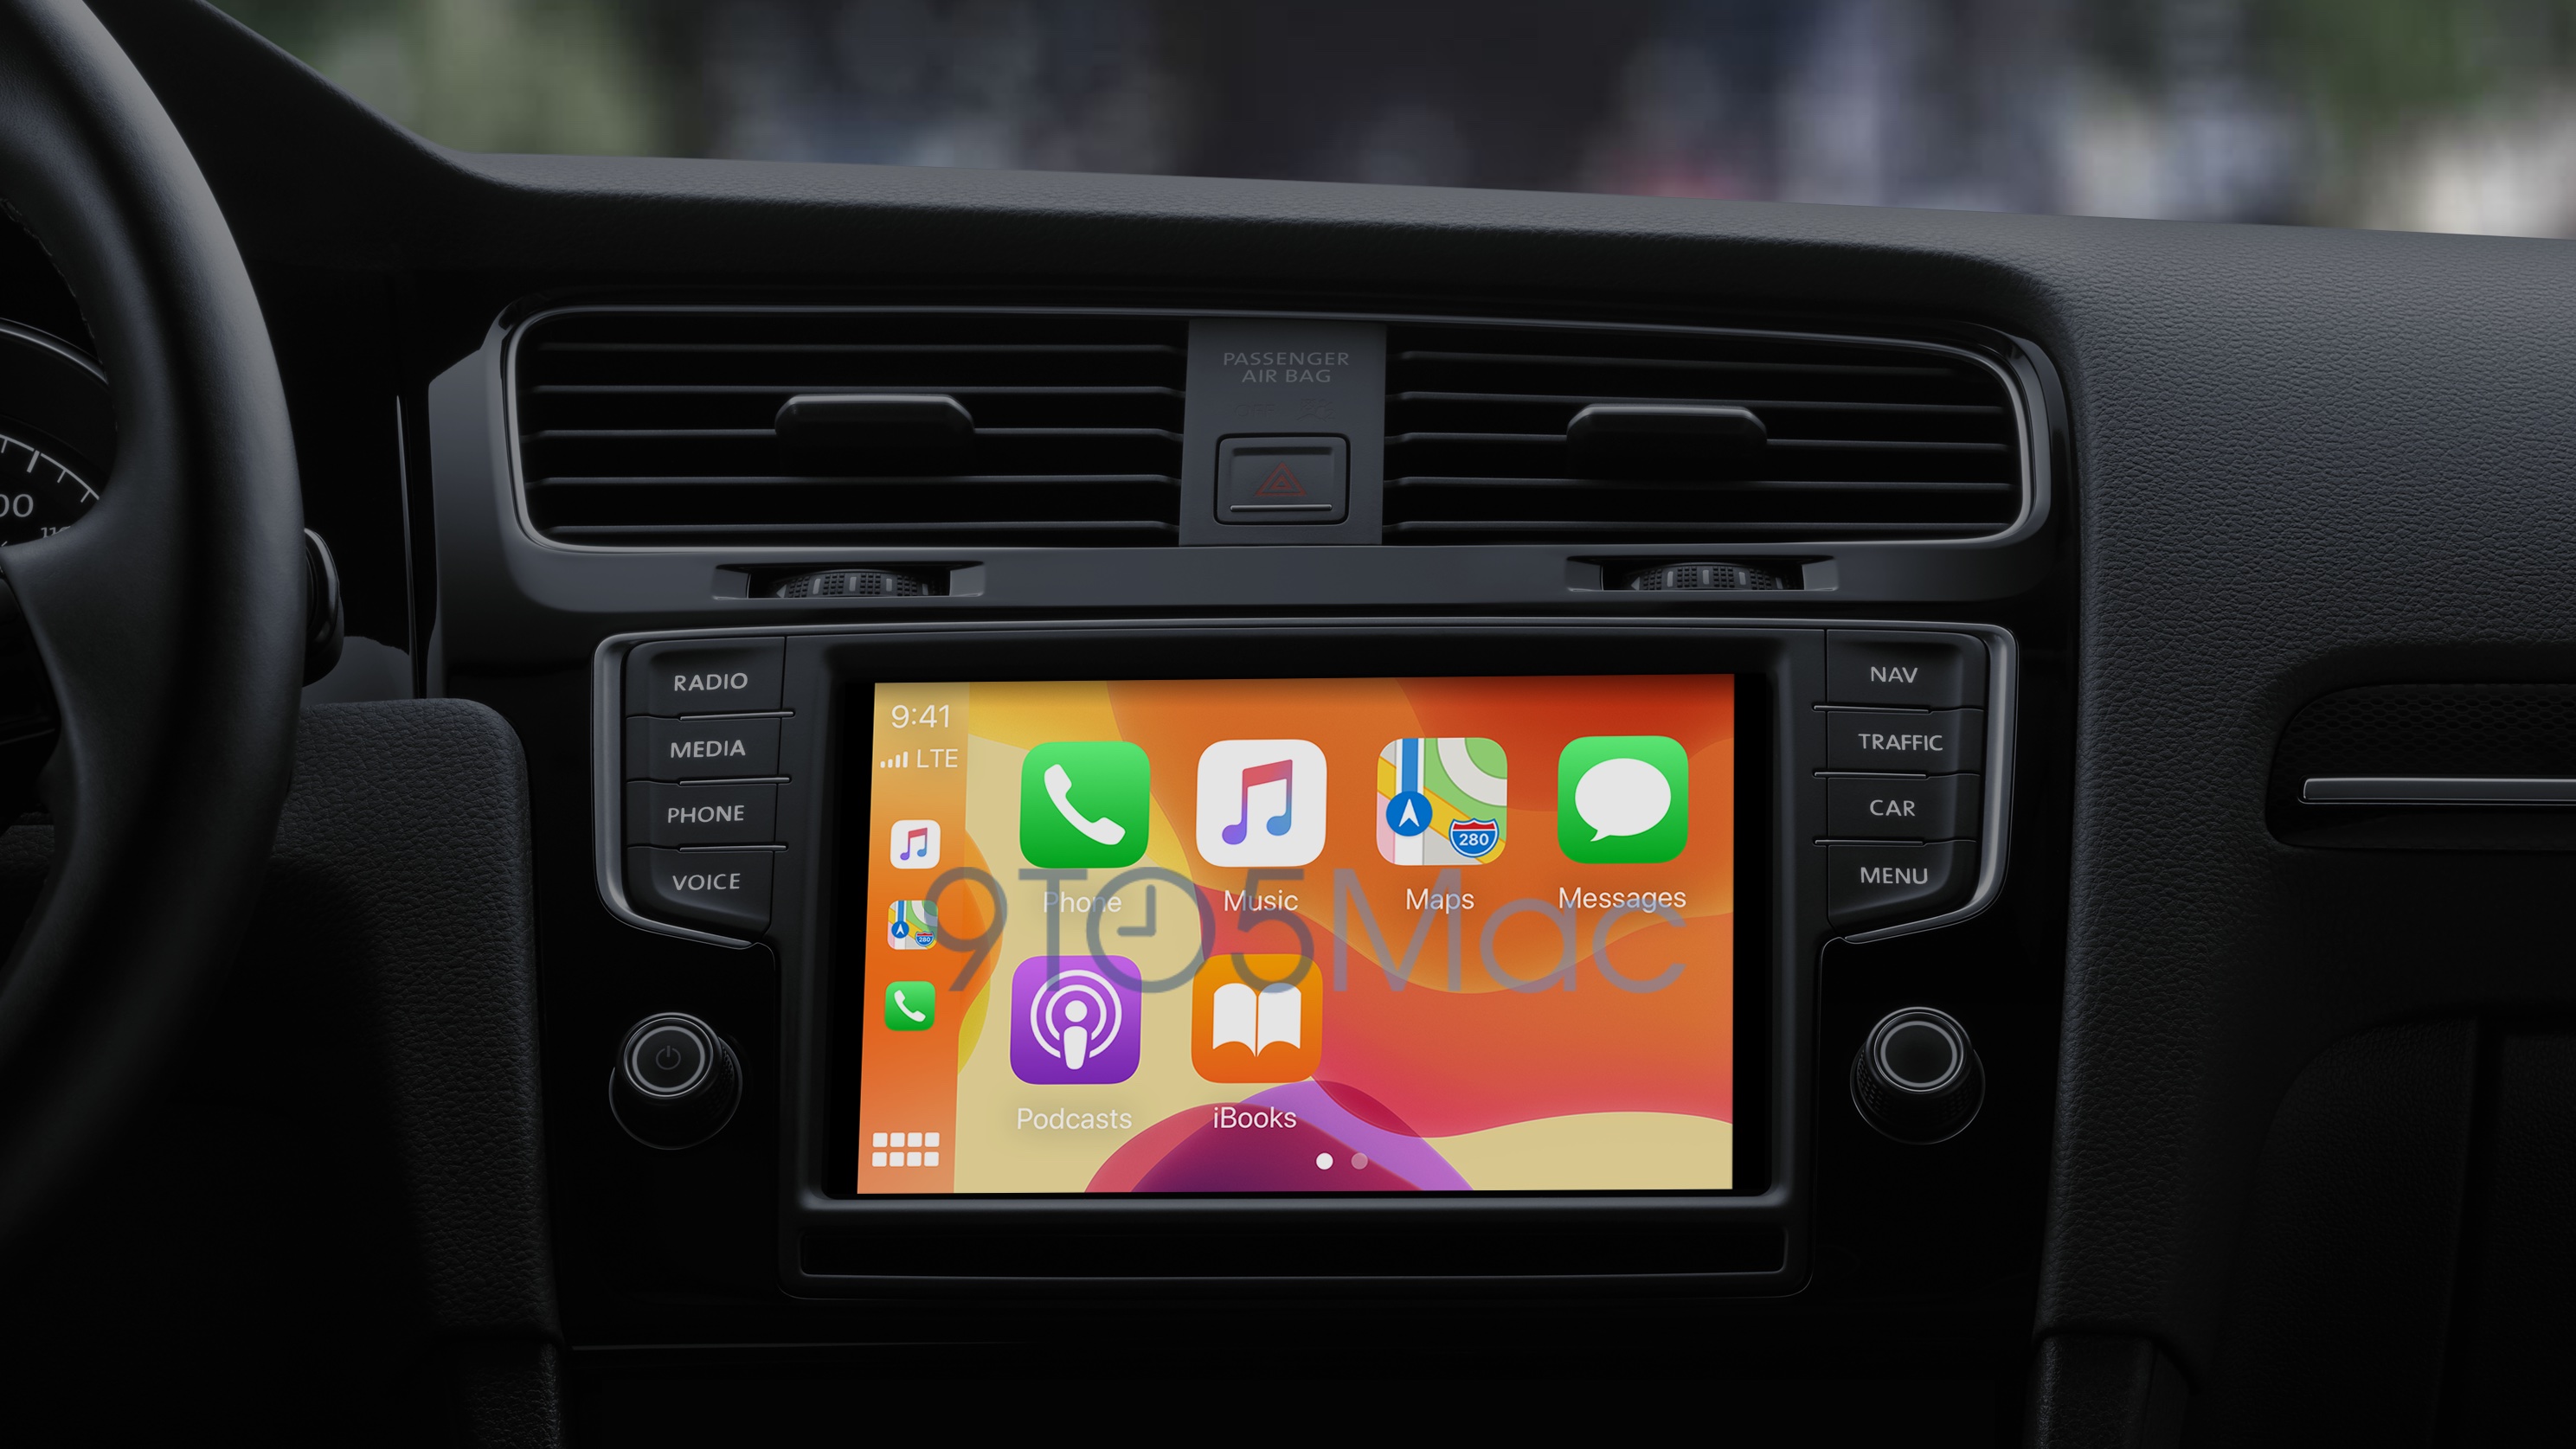 IOS 14 CarPlay May Support Custom Wallpaper With Automatic Light Dark Version Switching